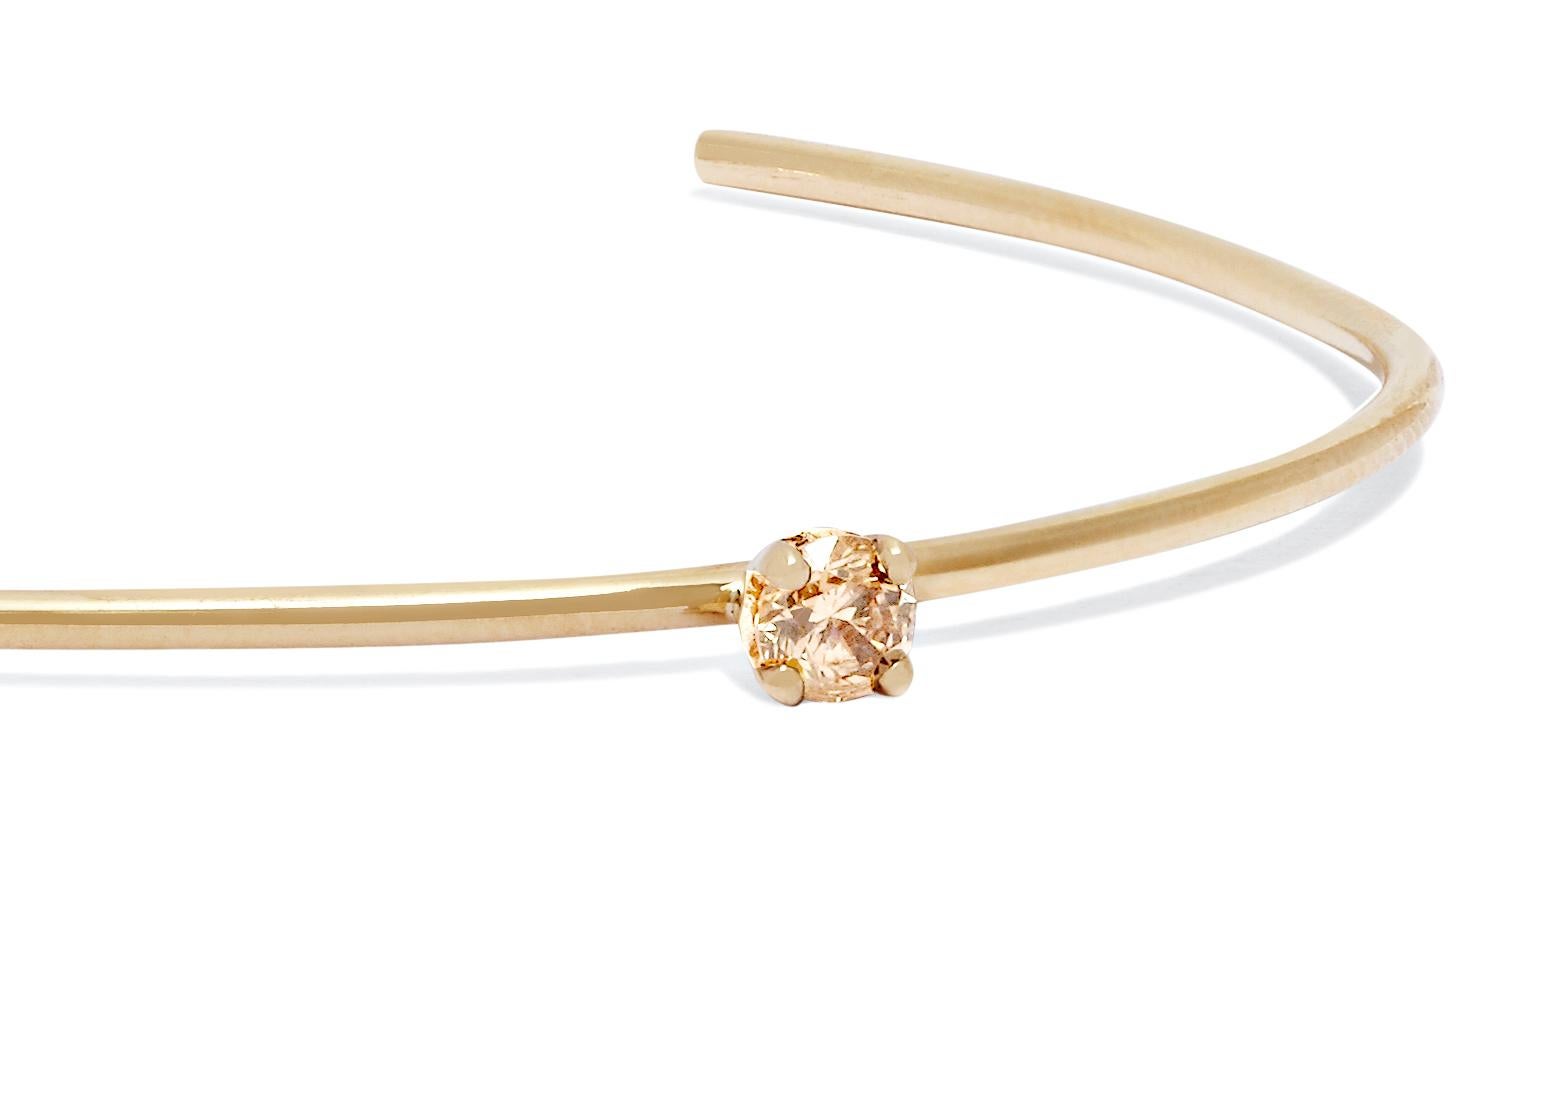 Clean-lined and simple, this solid 9-carat yellow gold cuff features a champagne diamond set to sparkle at the wrist bone.  Diamond measures approximately 3.9mm or one quarter of a carat.

Handmade in London. Hallmarked 375 Allison Bryan London. 